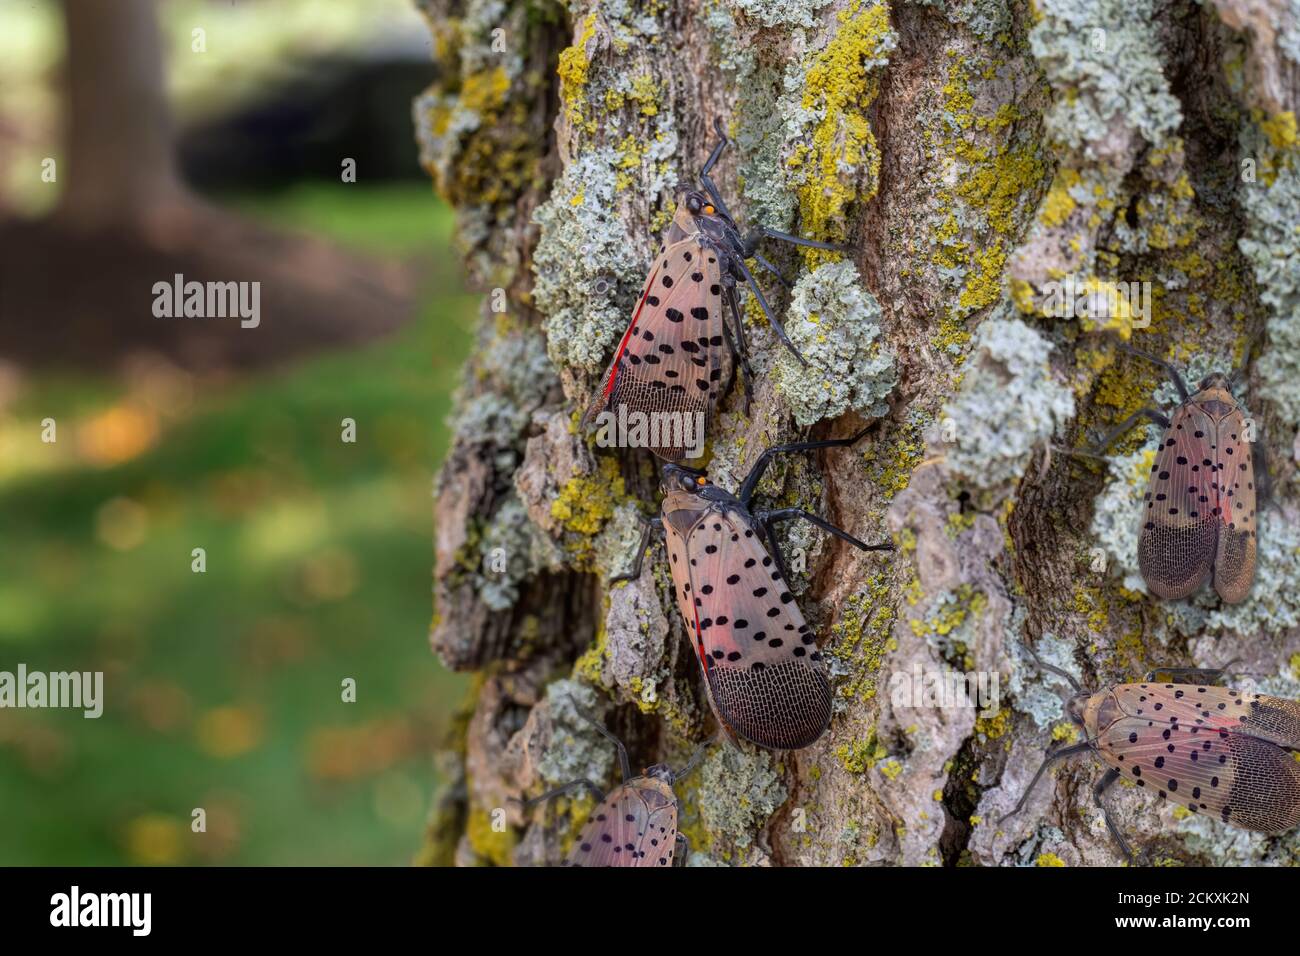 GROUP OF ADULT SPOTTED LANTERNFLIES (LYCORMA DELICATULA) ON THE TRUNK OF A TREE IN SOUTH EASTERN PENNSYLVANIA Stock Photo